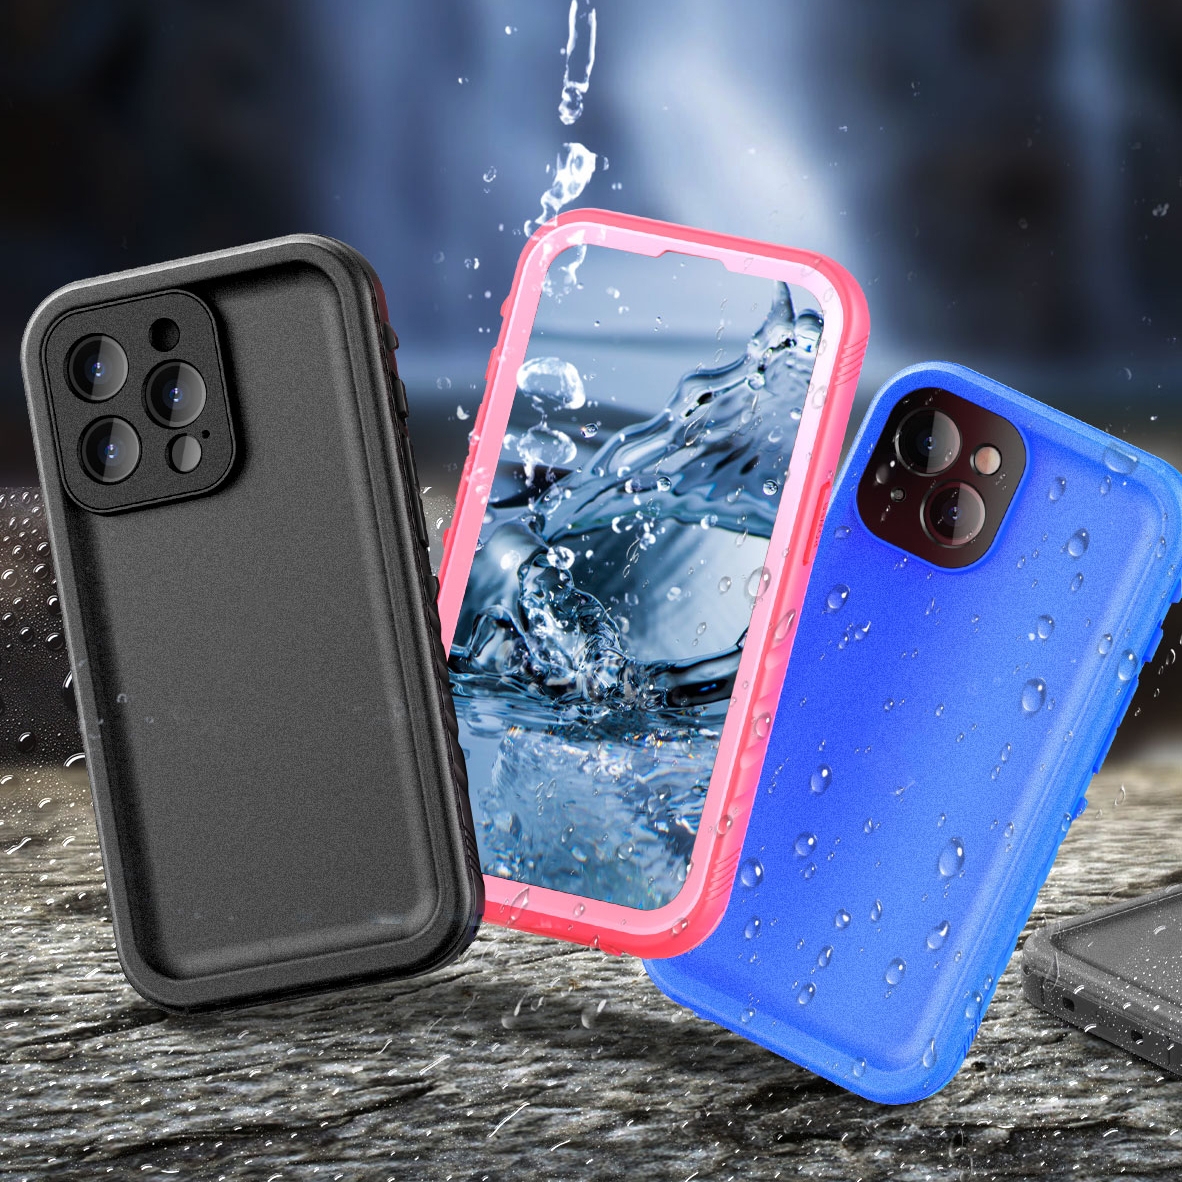 Sportlink Launches Waterproof case for the Latest iPhone Models